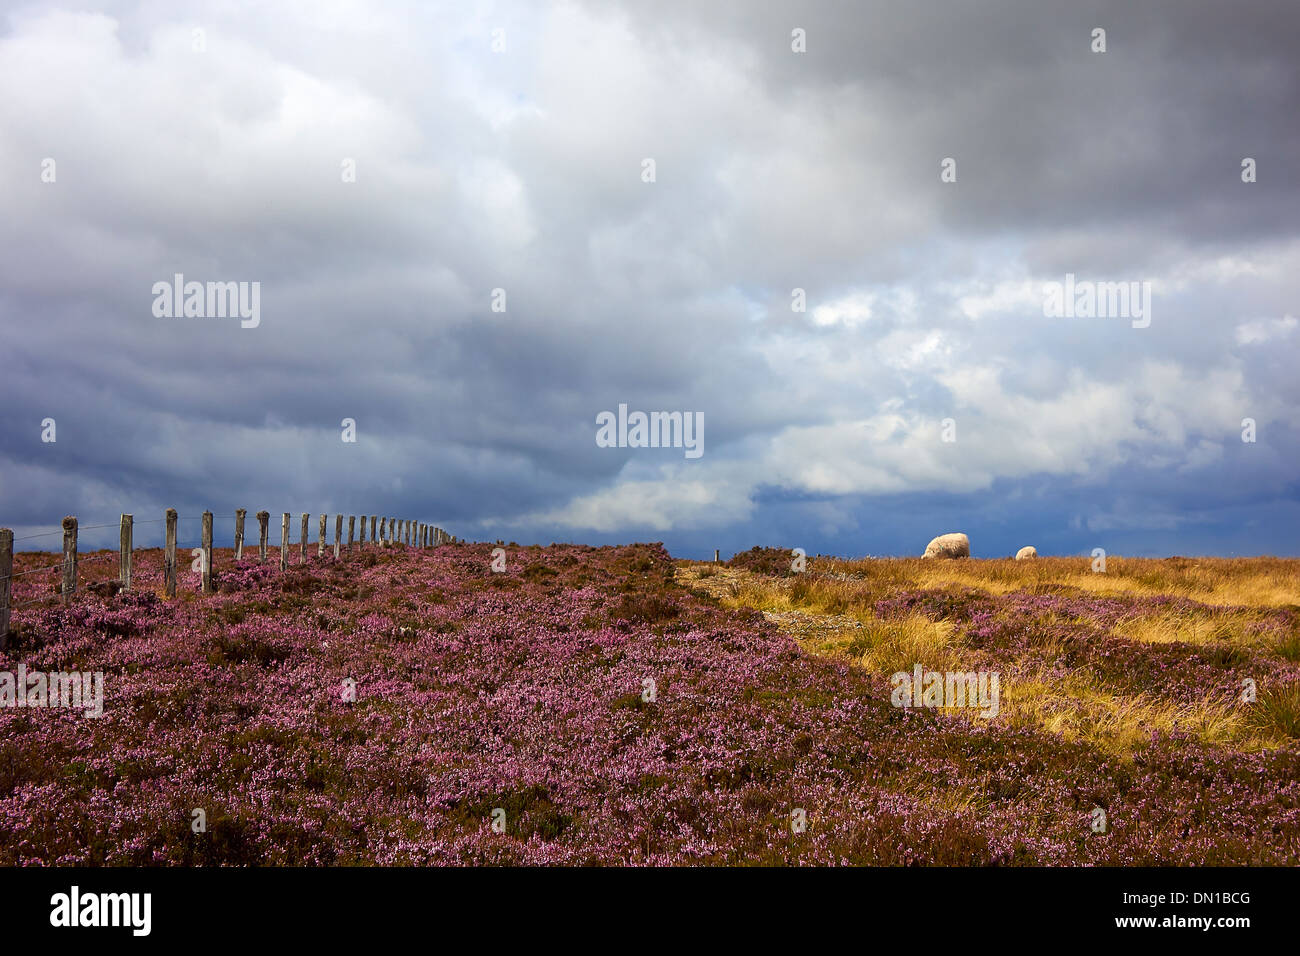 Wild heather flowering in the English Countryside, UK. Stock Photo